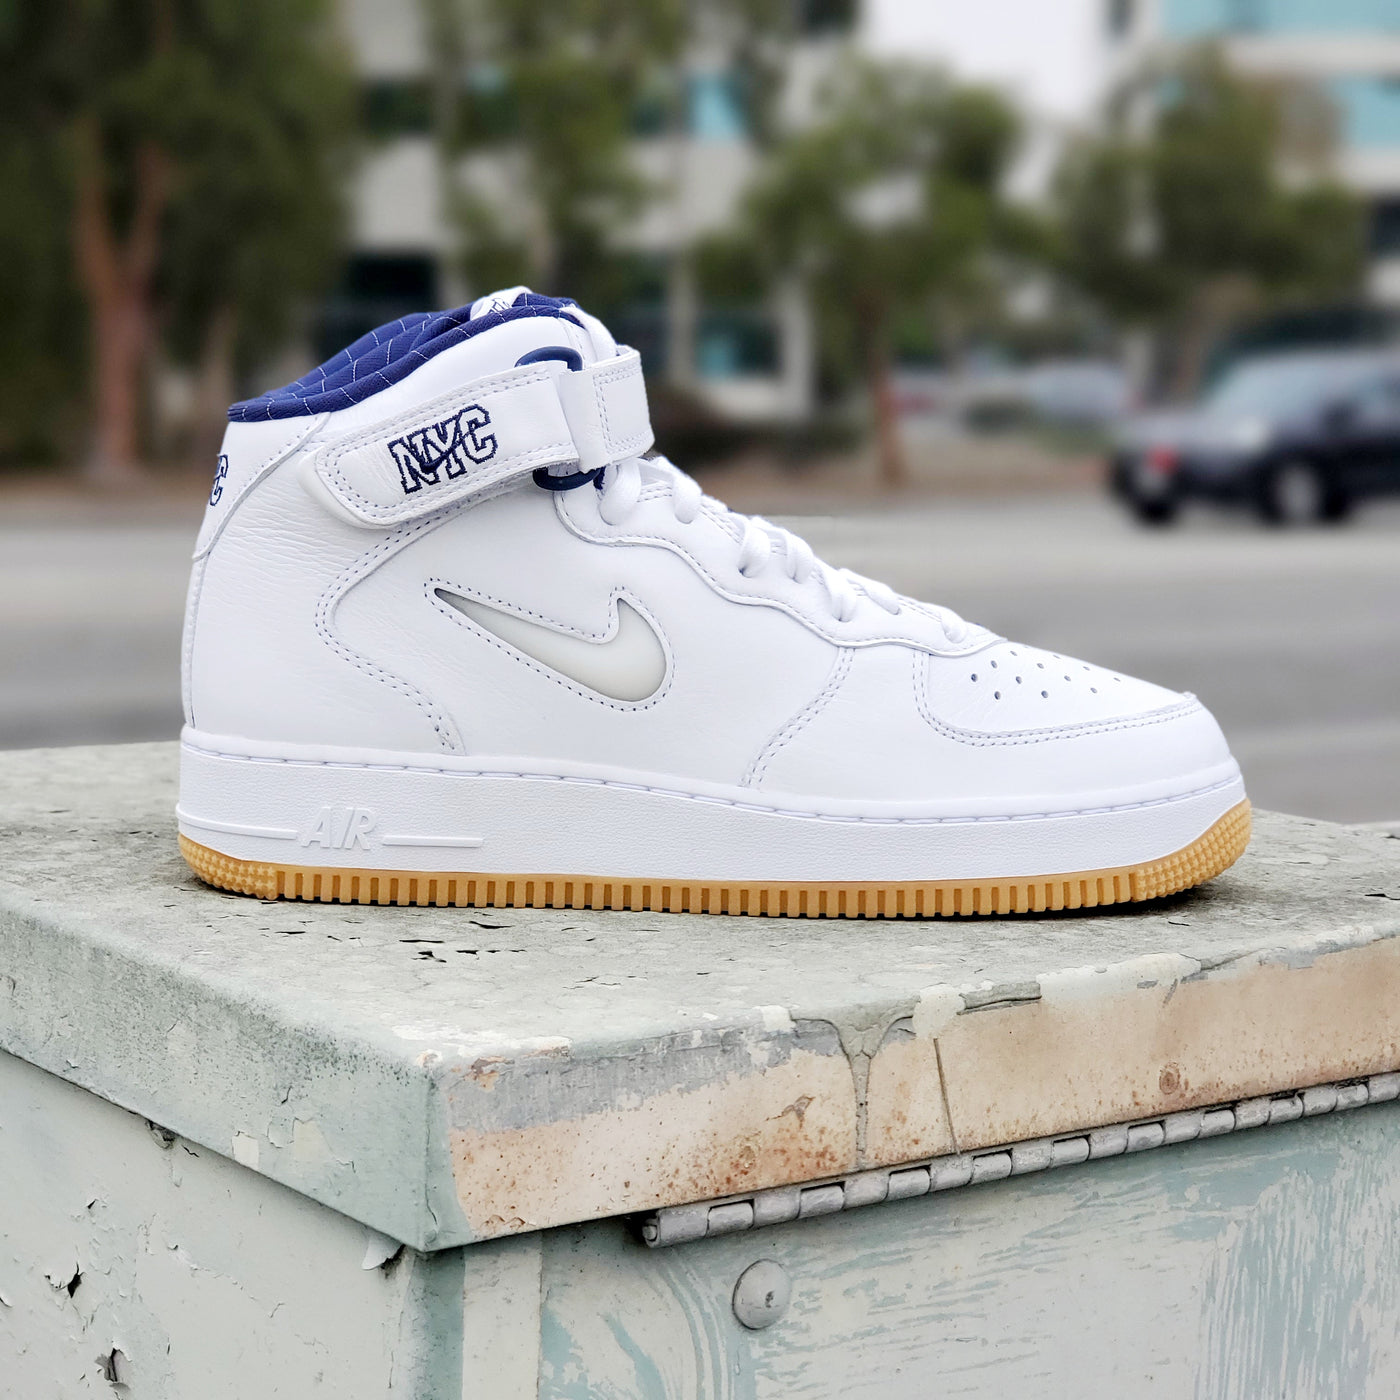 Nike Air Force 1 Mid QS Men's Shoes.